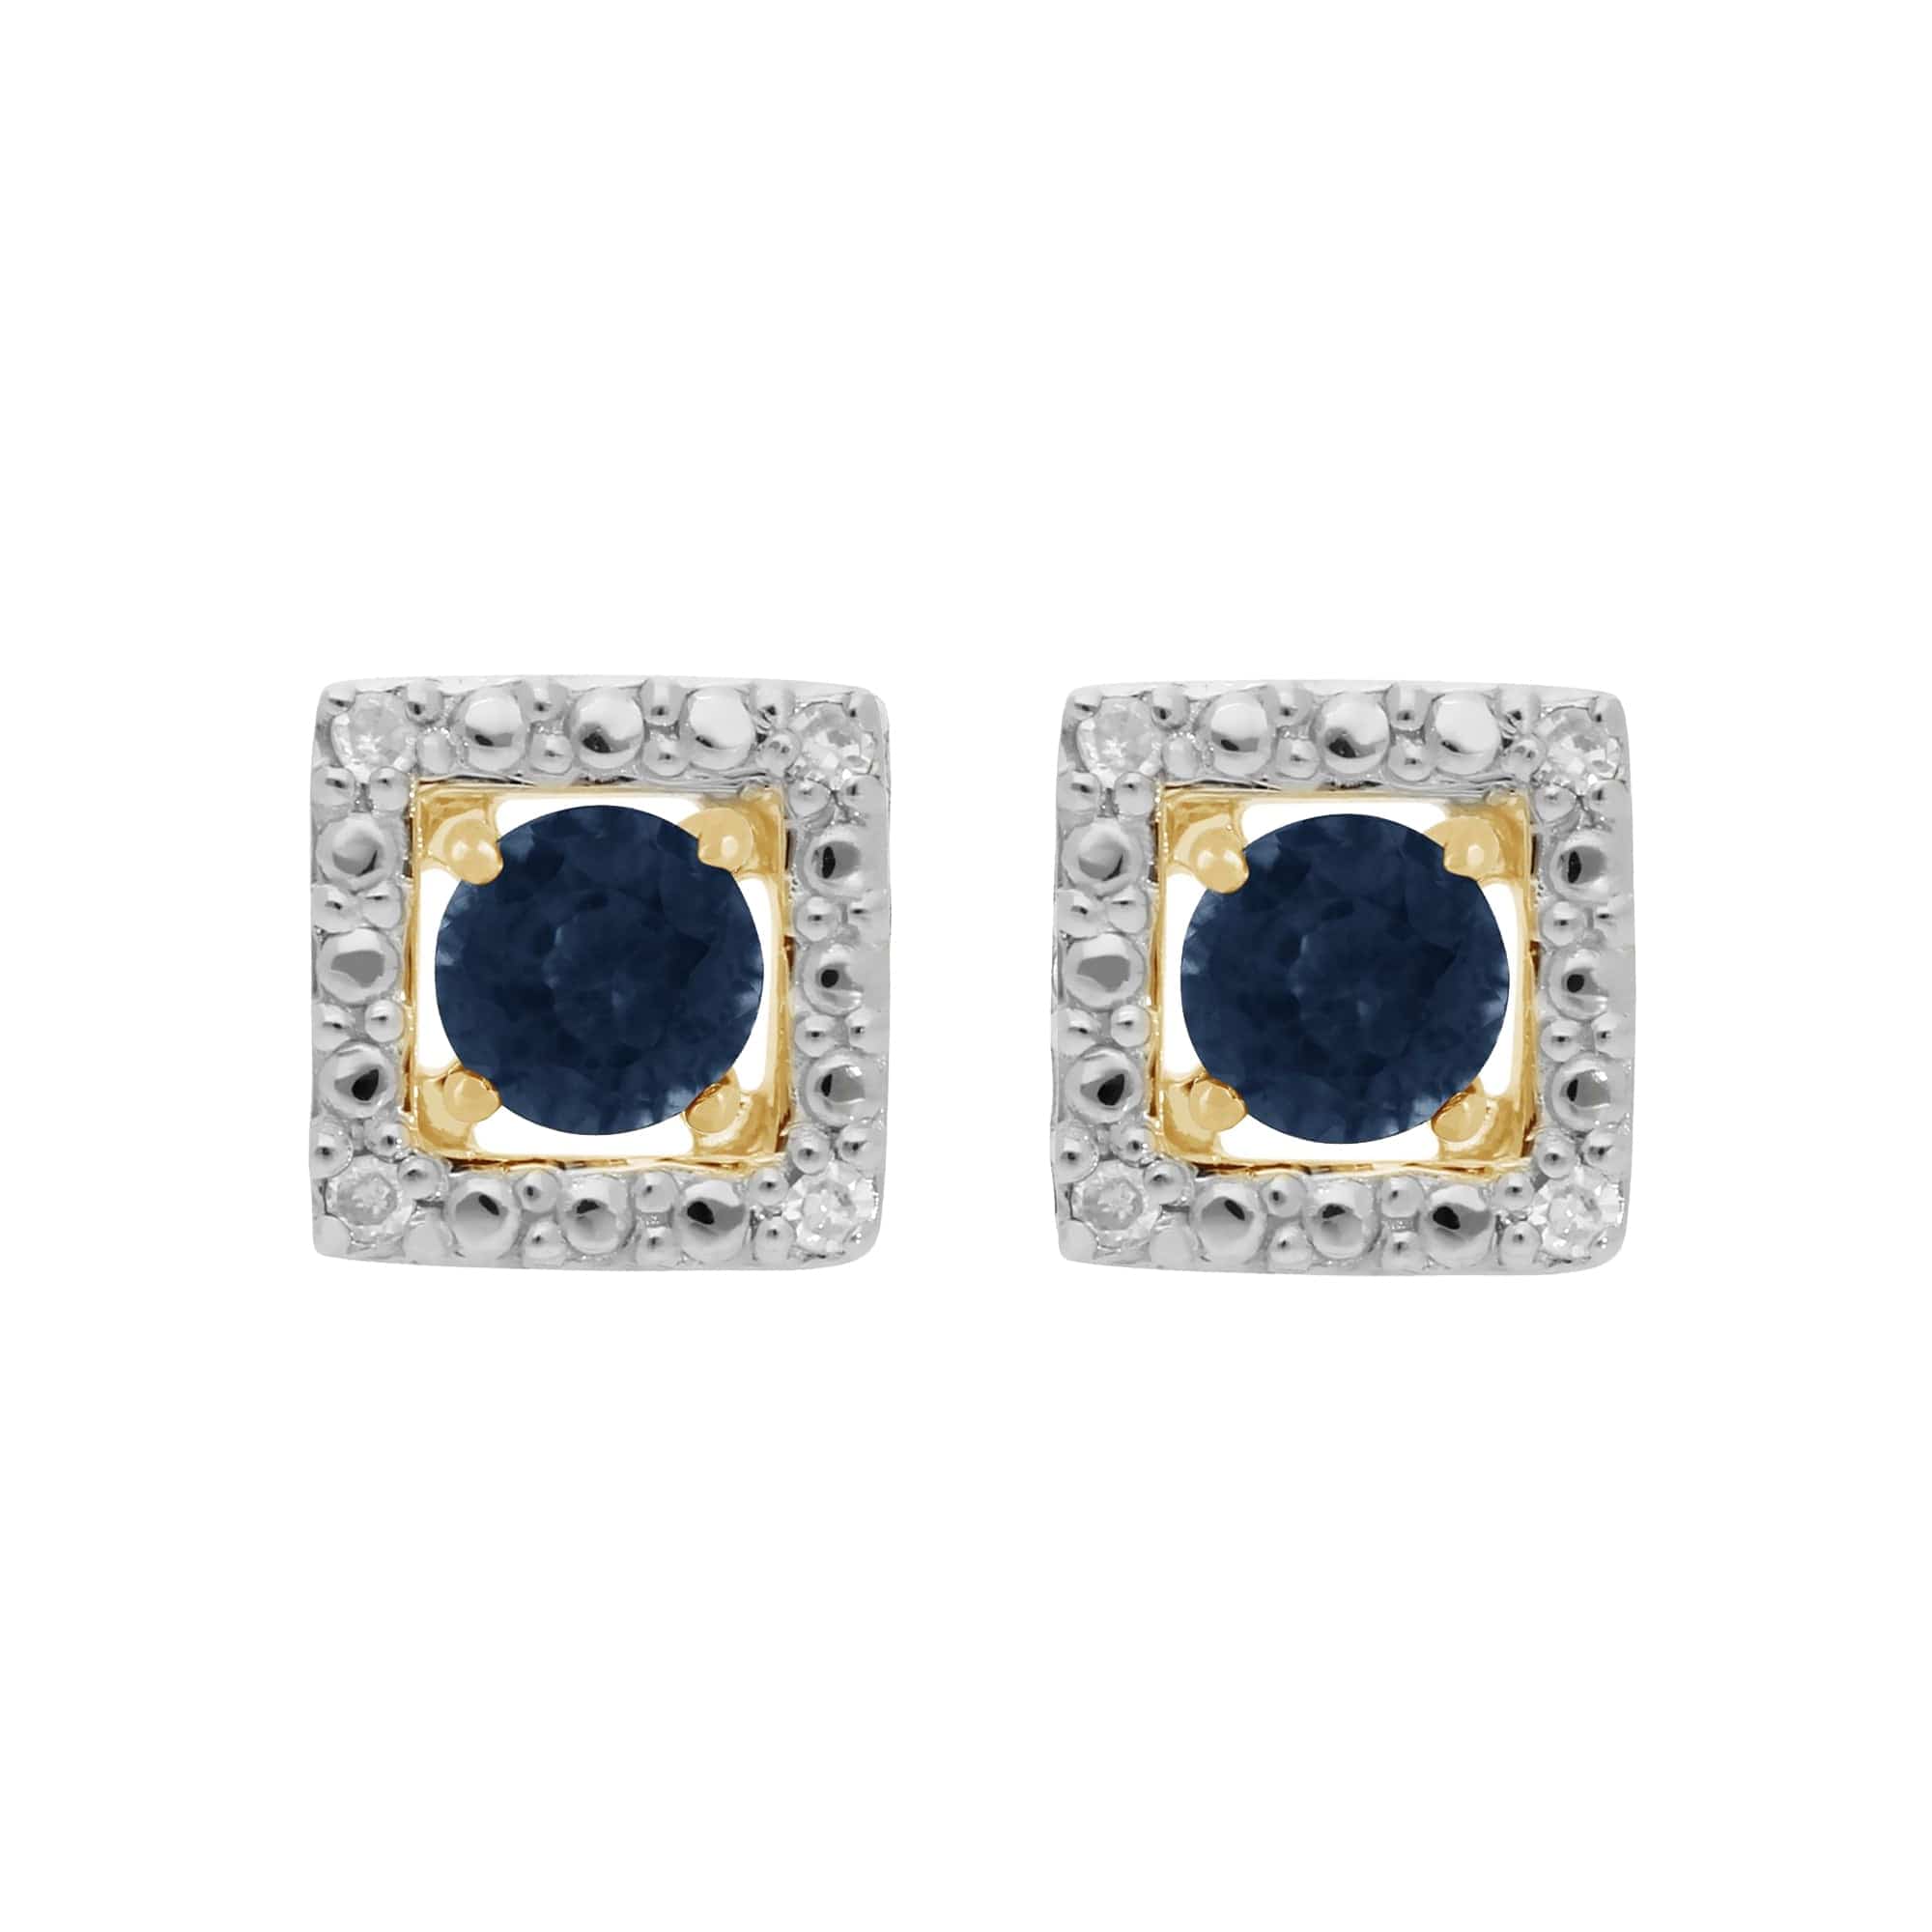 183E0083409-191E0379019 Classic Round Sapphire Stud Earrings with Detachable Diamond Square Earrings Jacket Set in 9ct Yellow Gold 1